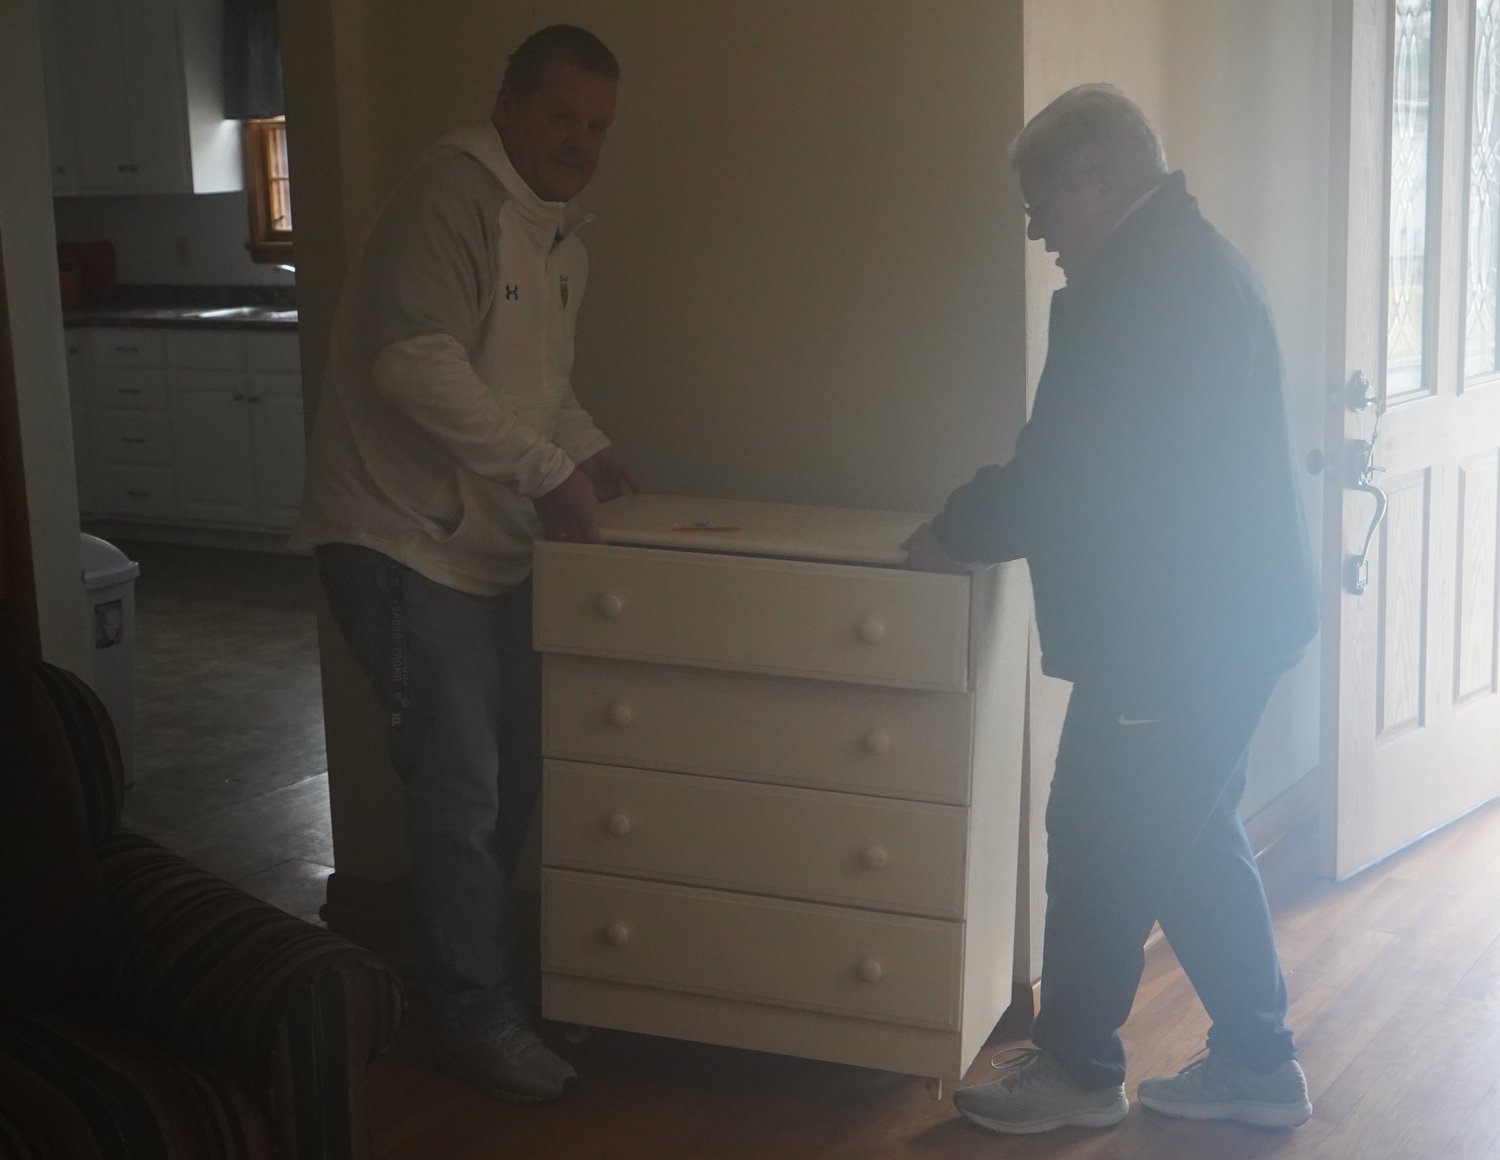 Sister Jean Dietrich of the School Sisters of Notre Dame, Helias Catholic High School’s office administrator and former principal, and Assistant Principal/Activities Director Dwayne Clingman deliver some furniture to a previously unoccupied home the school owns and is now allowing a resettled family from Afghanistan to live in rent-free.